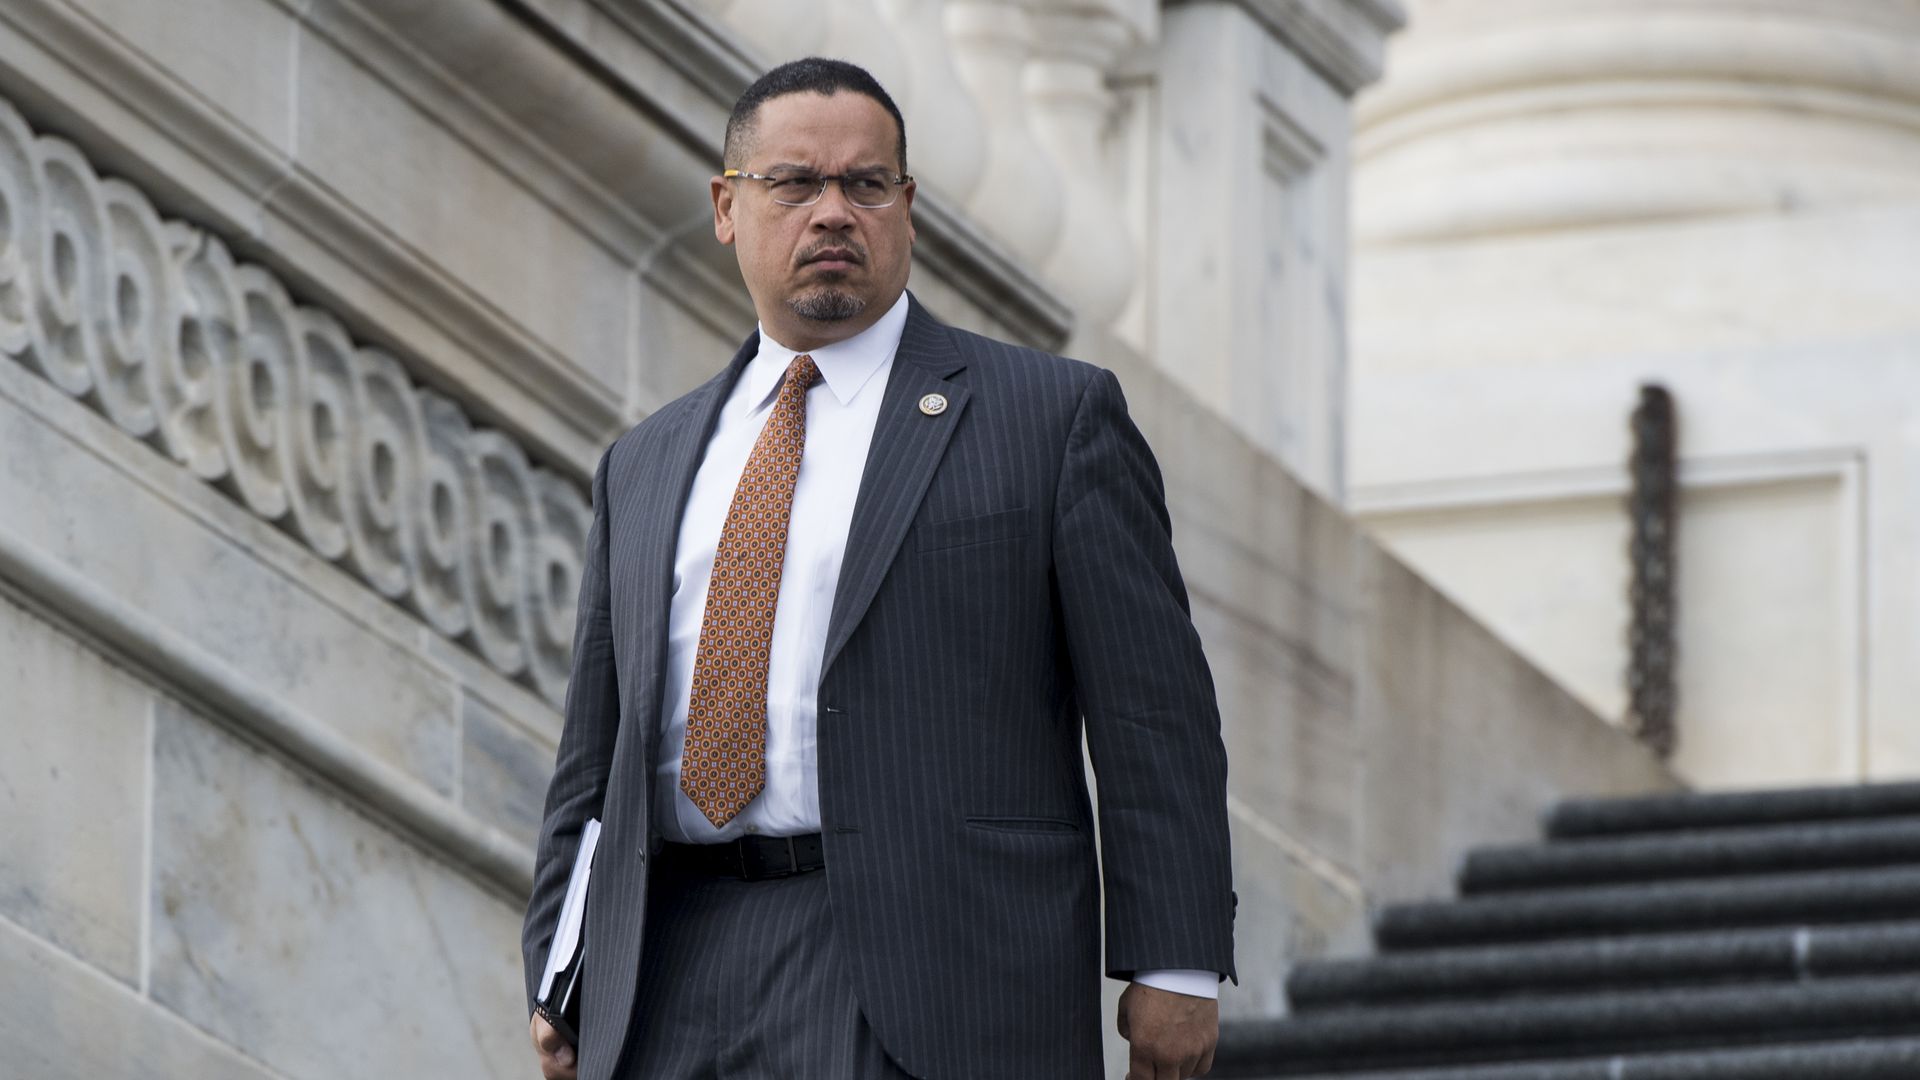 Rep. Keith Ellison denies domestic abuse allegations - Axios1920 x 1080